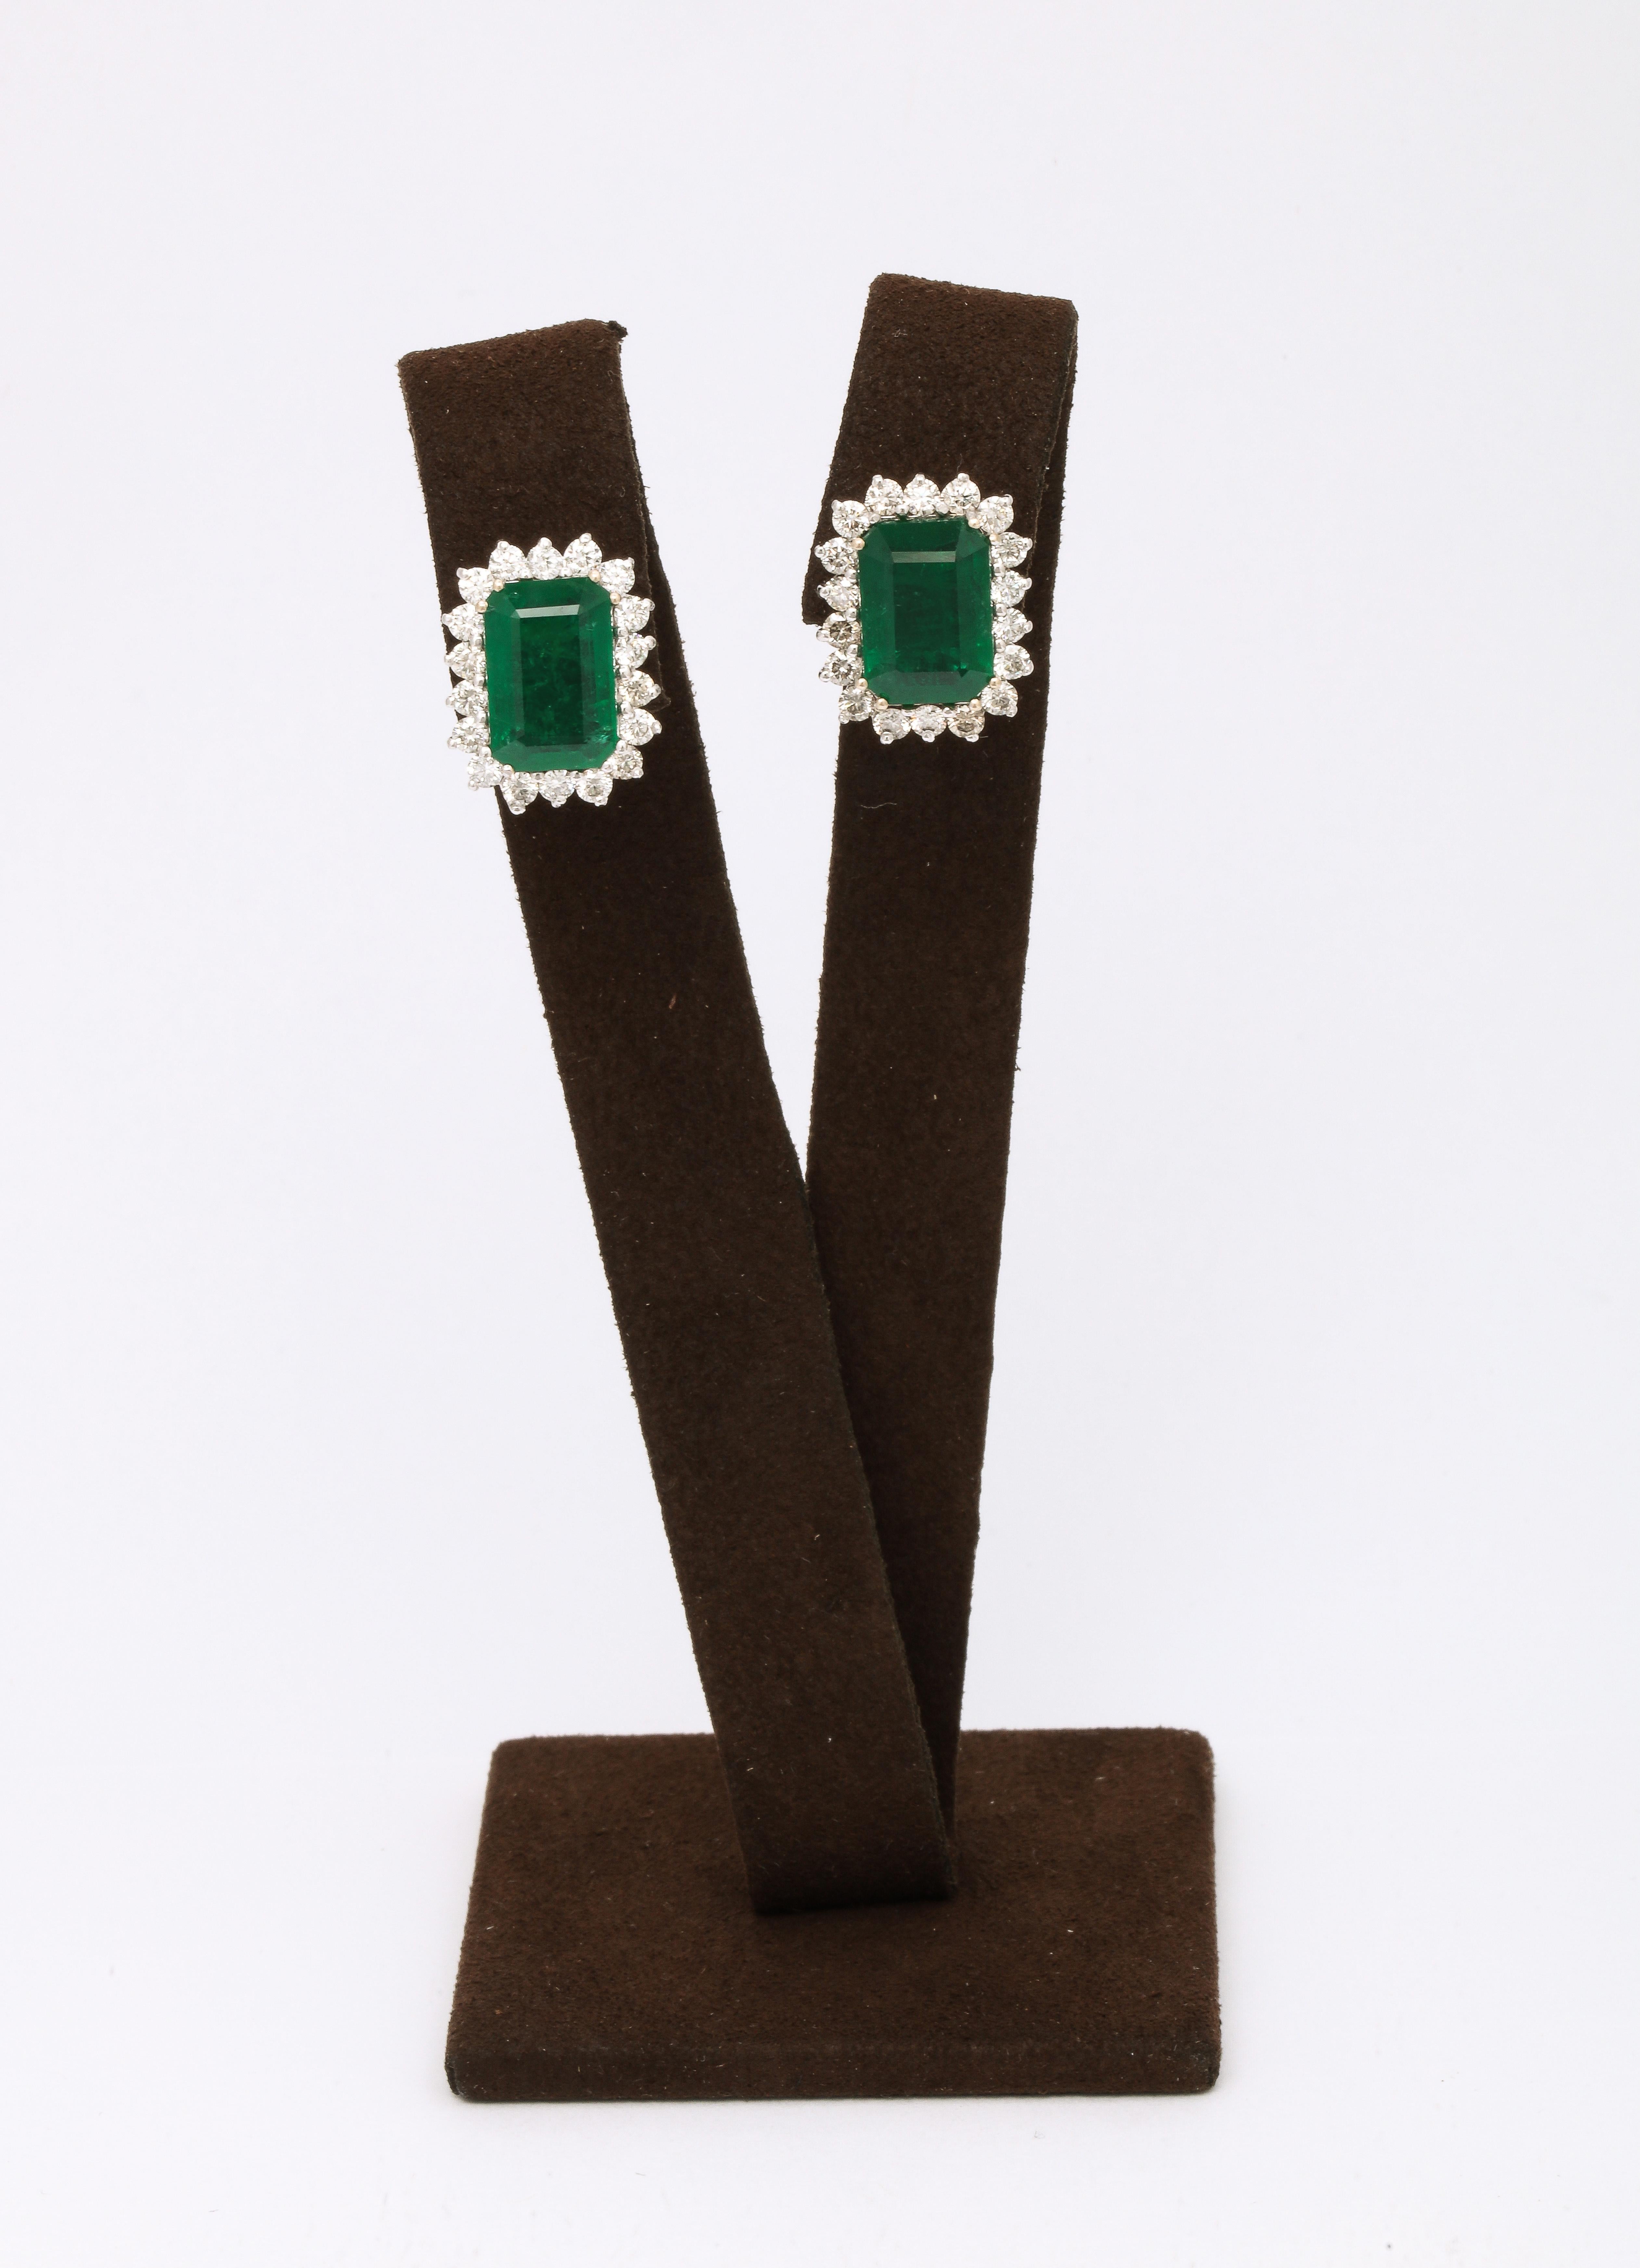 An elegant pair of Emerald and Diamond earrings. 

9.80 carats of Fine Green Emerald 

1.80 carats of diamonds 

18k white gold. 

Approximately .70 x .55 inches — for pierced ears. 

A beautiful gift! 